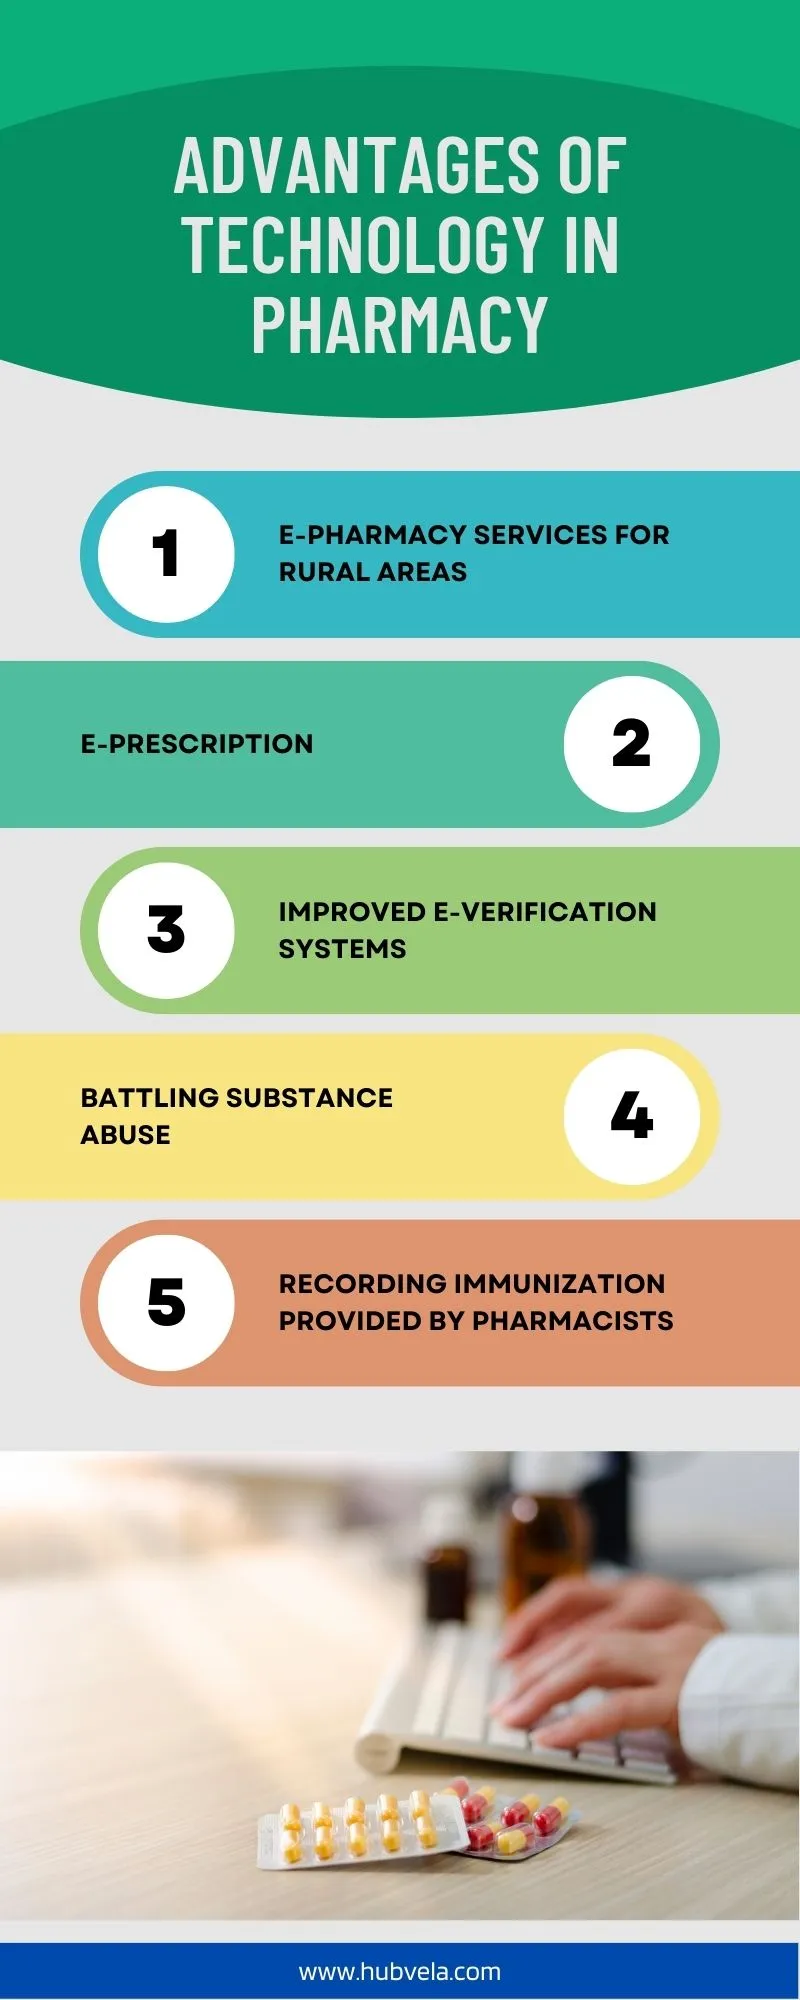 Advantages of Technology in Pharmacy Infographic